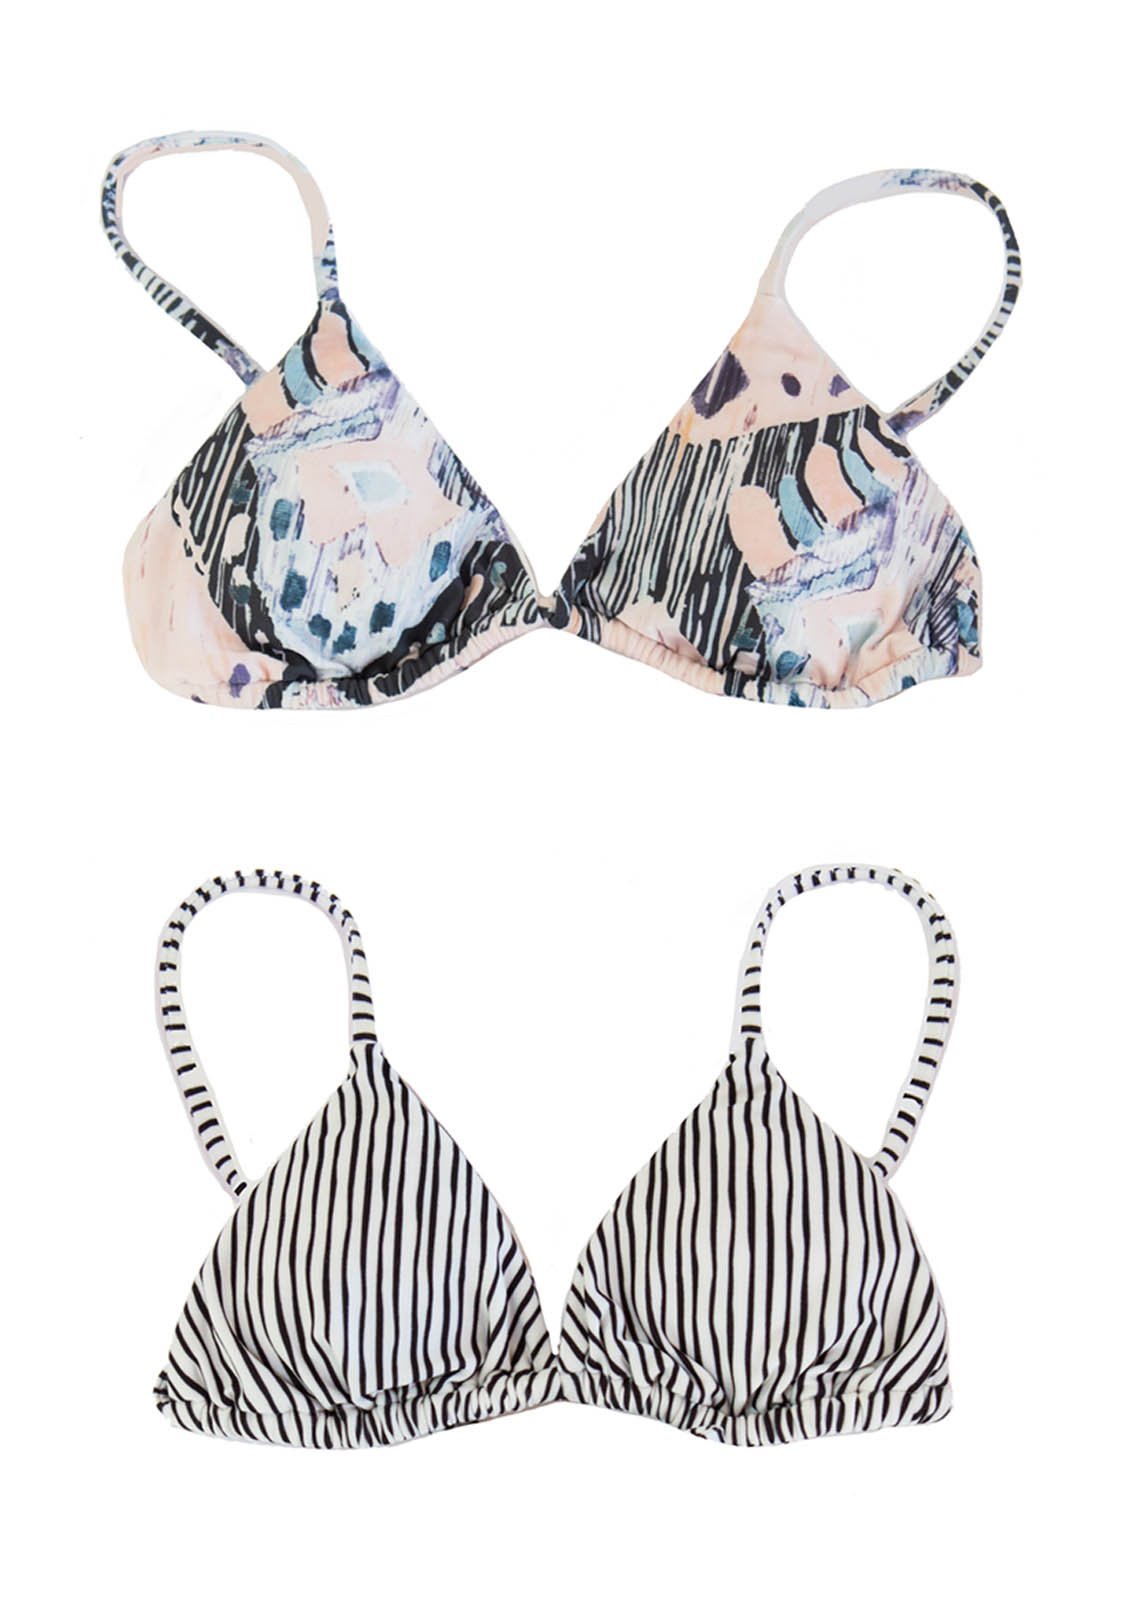 The Reversible sides of the "Isla Komodo" bikini, which is another popular bikini choice from California Swim Brand "Chance Loves".